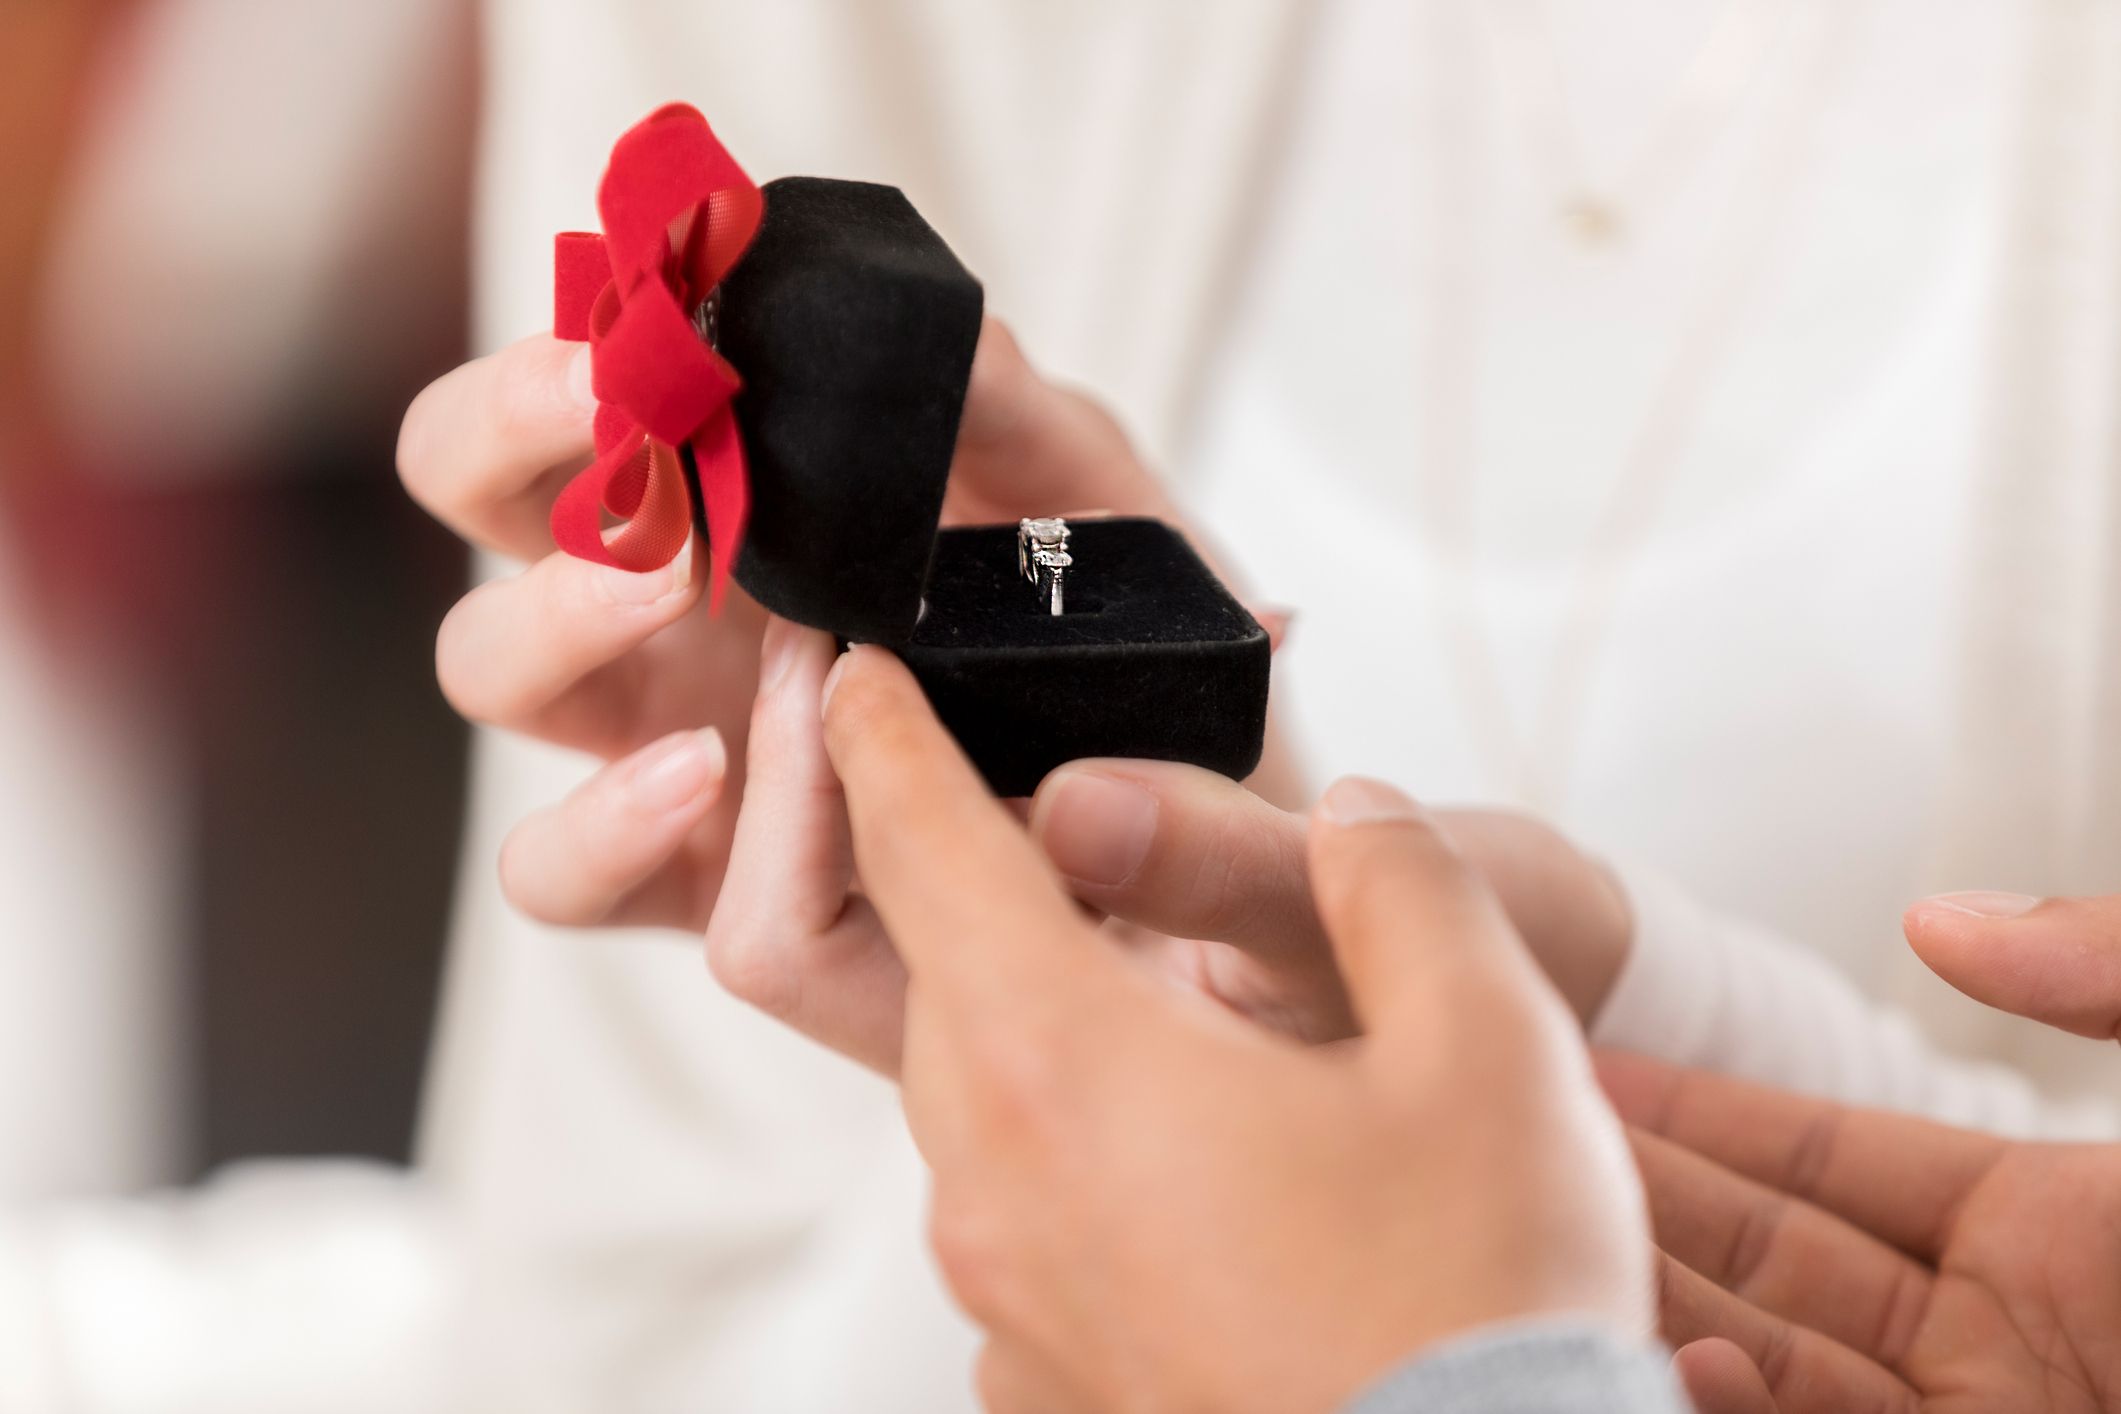 Unique Ideas to Propose on Propose Day - SnapBlooms Blogs